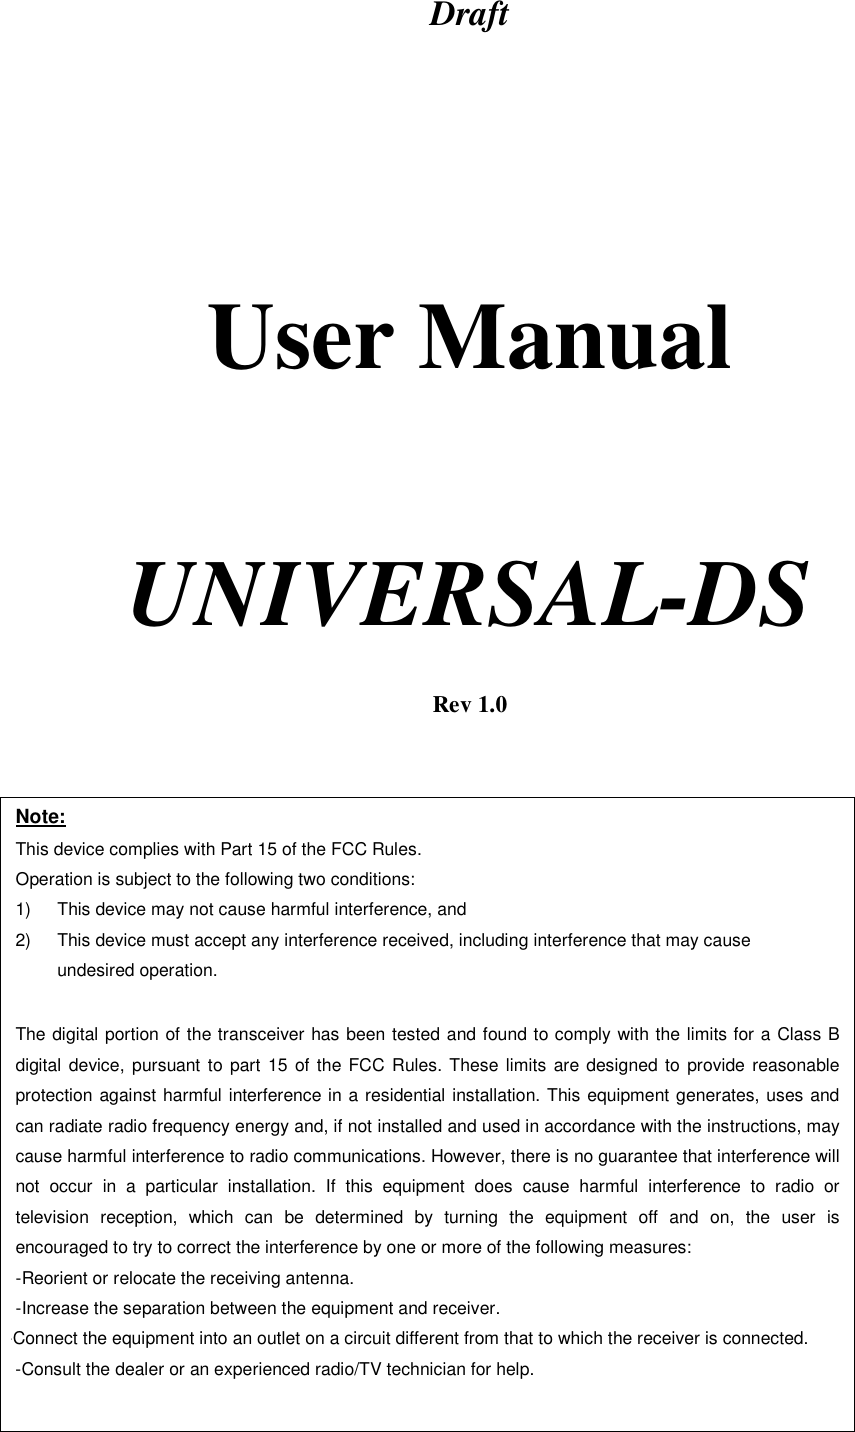 Draft       User Manual     UNIVERSAL-DS   Rev 1.0  Note: This device complies with Part 15 of the FCC Rules. Operation is subject to the following two conditions: 1)  This device may not cause harmful interference, and 2)  This device must accept any interference received, including interference that may cause undesired operation.  The digital portion of the transceiver has been tested and found to comply with the limits for a Class B digital device, pursuant to part 15 of the FCC Rules. These limits are designed to provide reasonable protection against harmful interference in a residential installation. This equipment generates, uses and can radiate radio frequency energy and, if not installed and used in accordance with the instructions, may cause harmful interference to radio communications. However, there is no guarantee that interference will not occur in a particular installation. If this equipment does cause harmful interference to radio or television reception, which can be determined by turning the equipment off and on, the user is encouraged to try to correct the interference by one or more of the following measures:  -Reorient or relocate the receiving antenna. -Increase the separation between the equipment and receiver. -Connect the equipment into an outlet on a circuit different from that to which the receiver is connected. -Consult the dealer or an experienced radio/TV technician for help.  